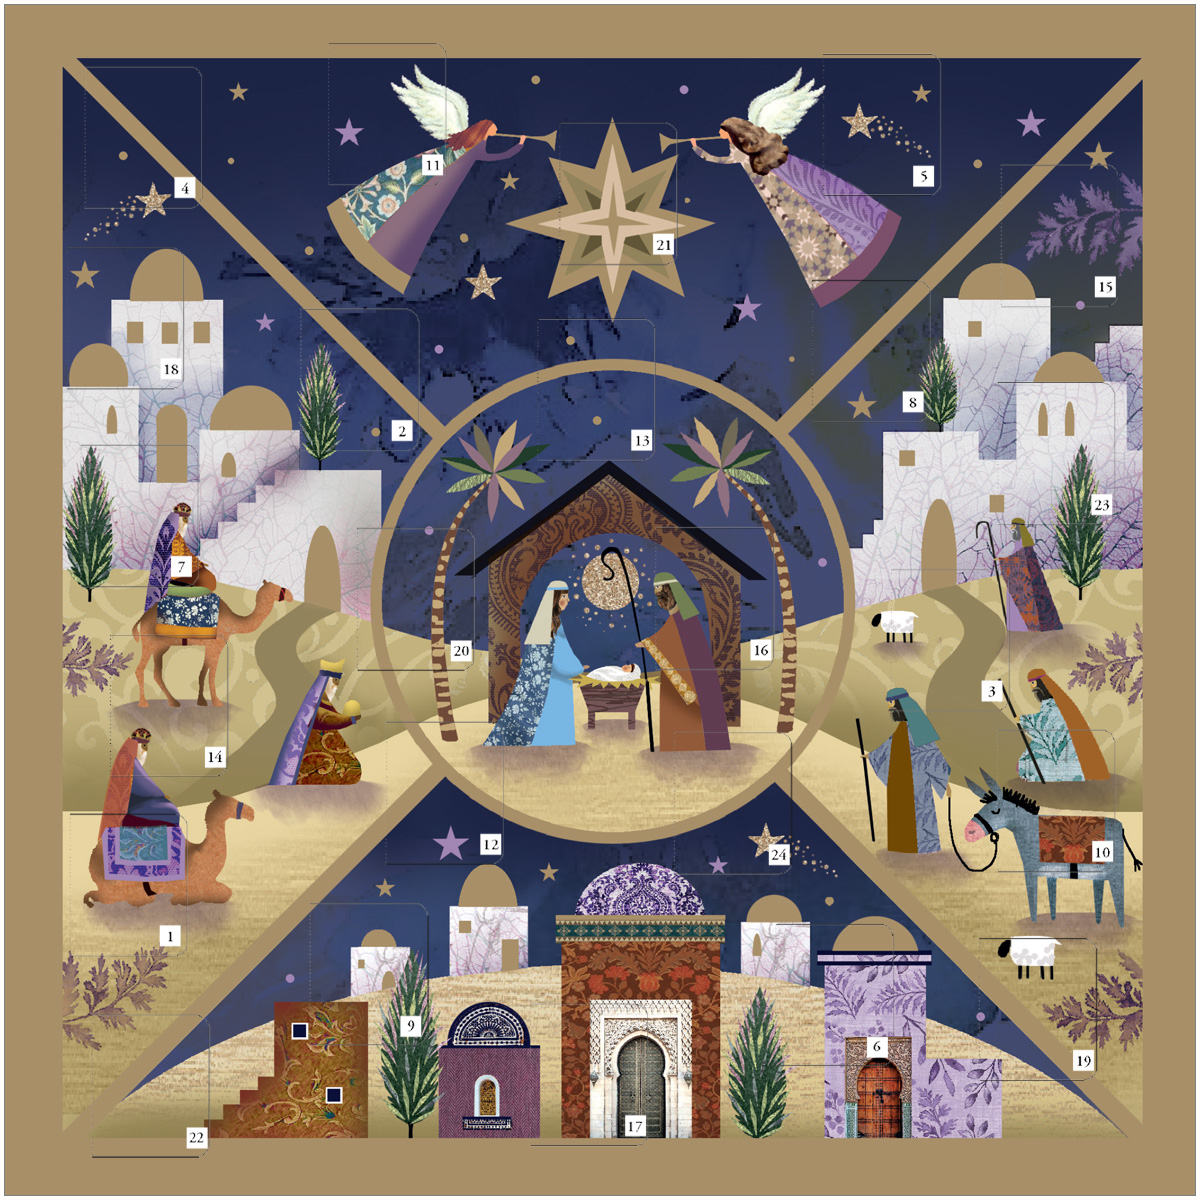 Nativity Square Advent Calendar Card Free Delivery when you spend £10